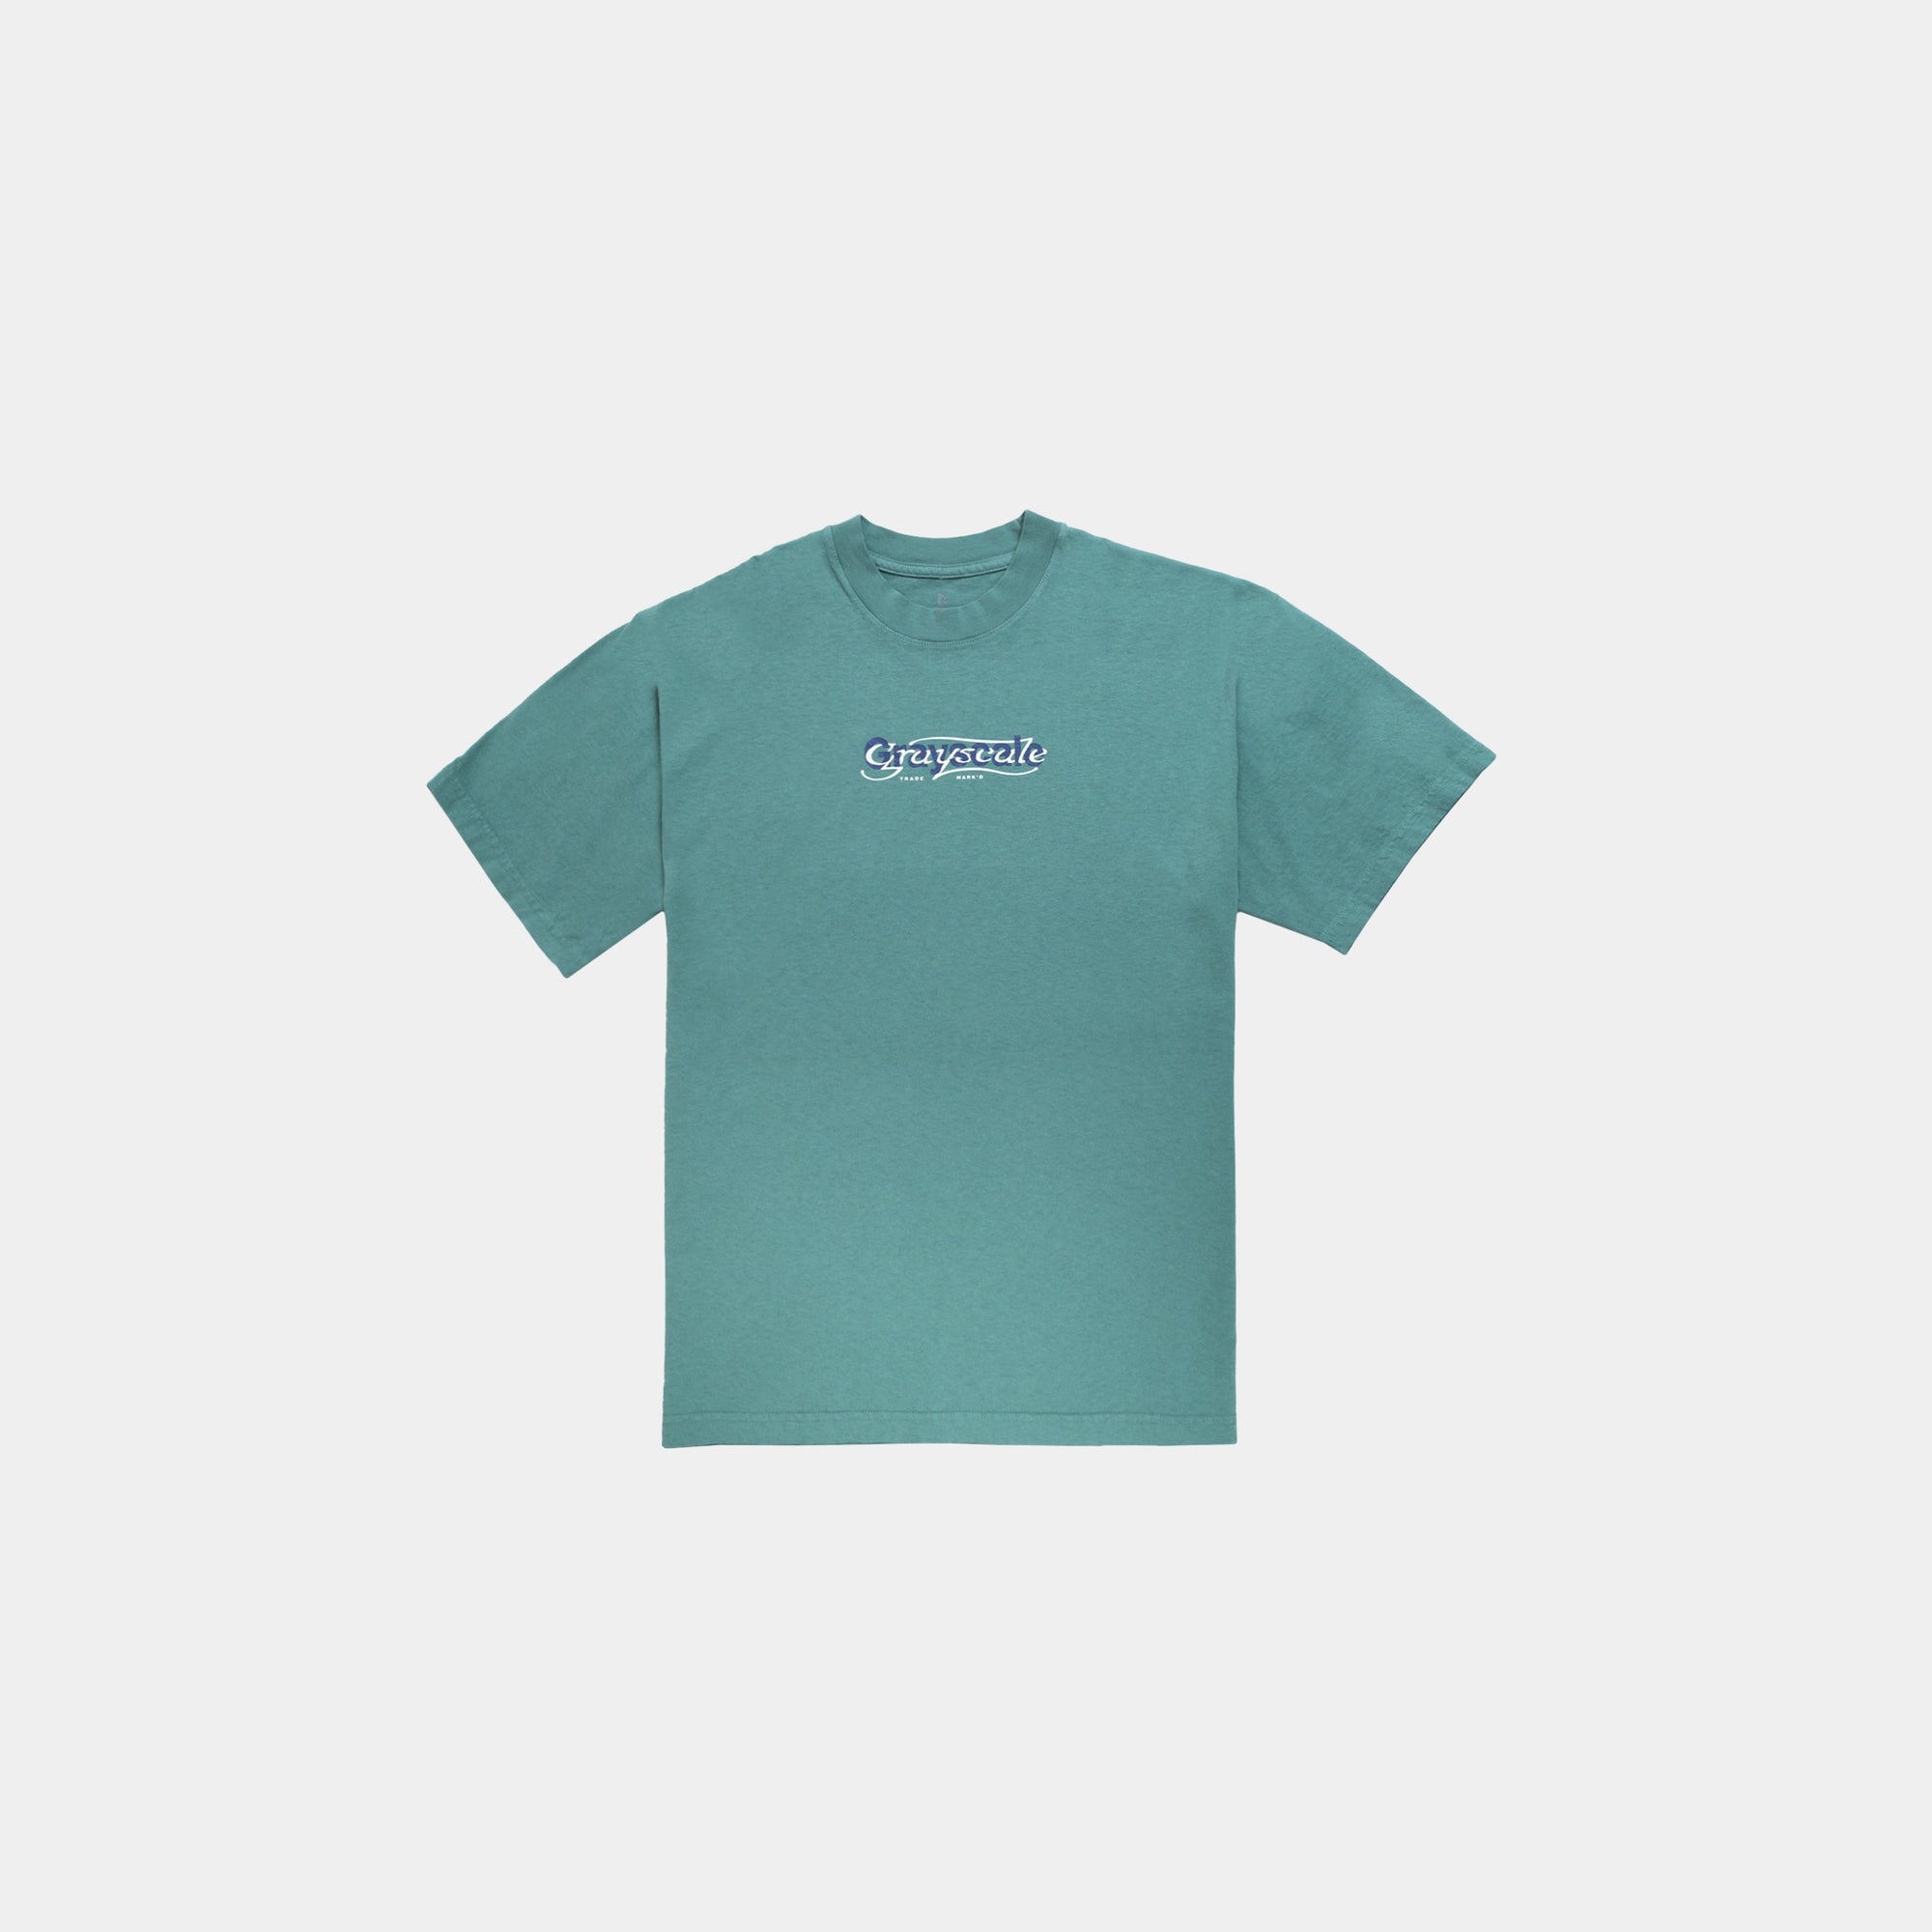 Signature Stacked Script Tee - Vintage Green